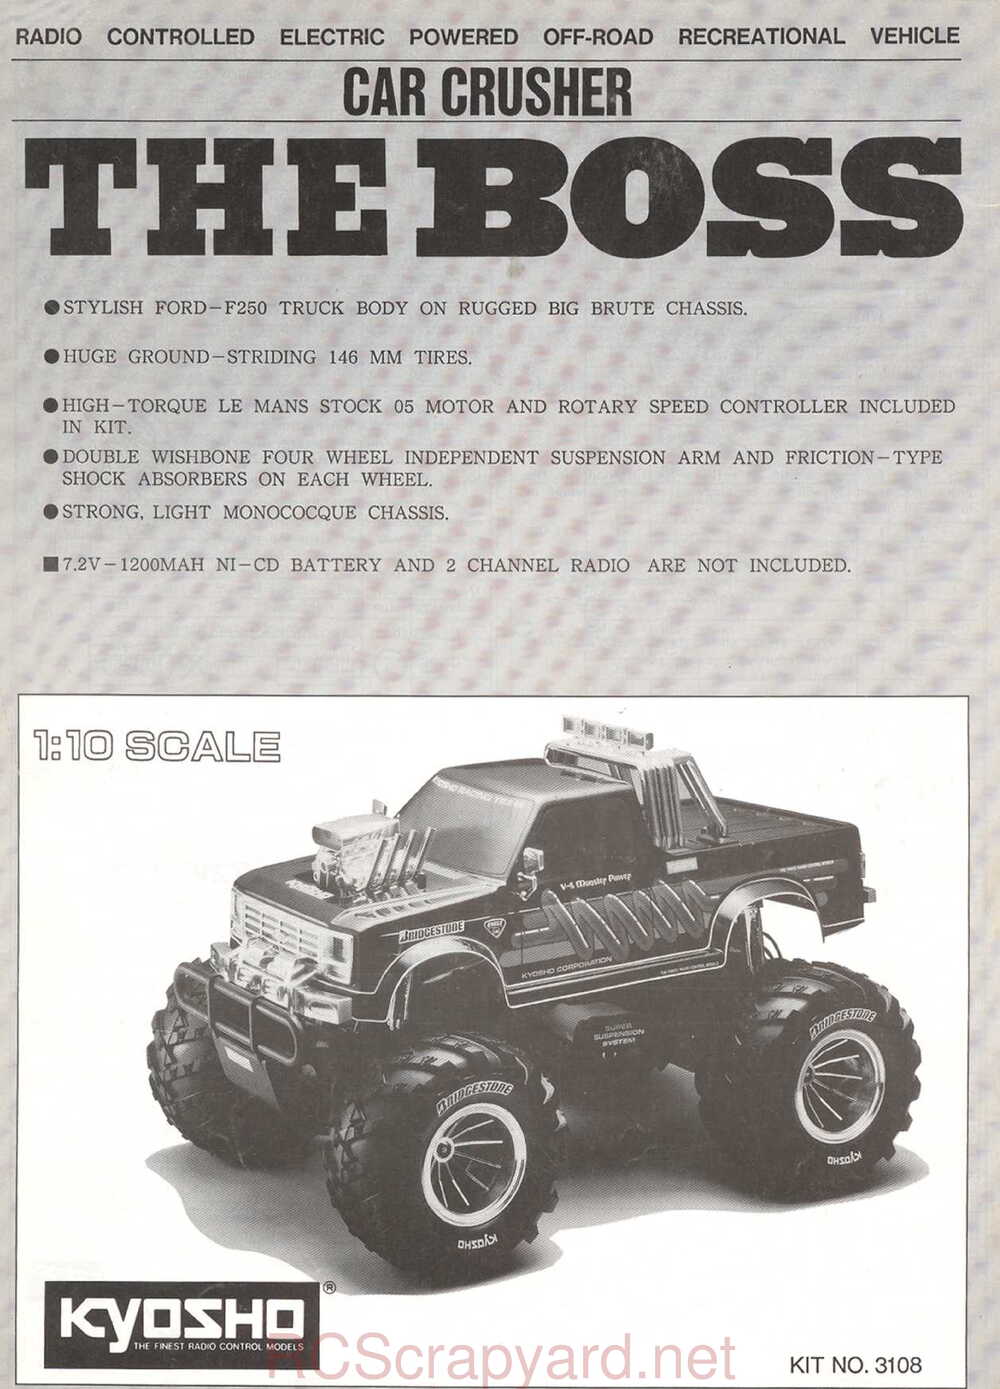 Kyosho - 3108 - The-Boss - Manual - Page 01